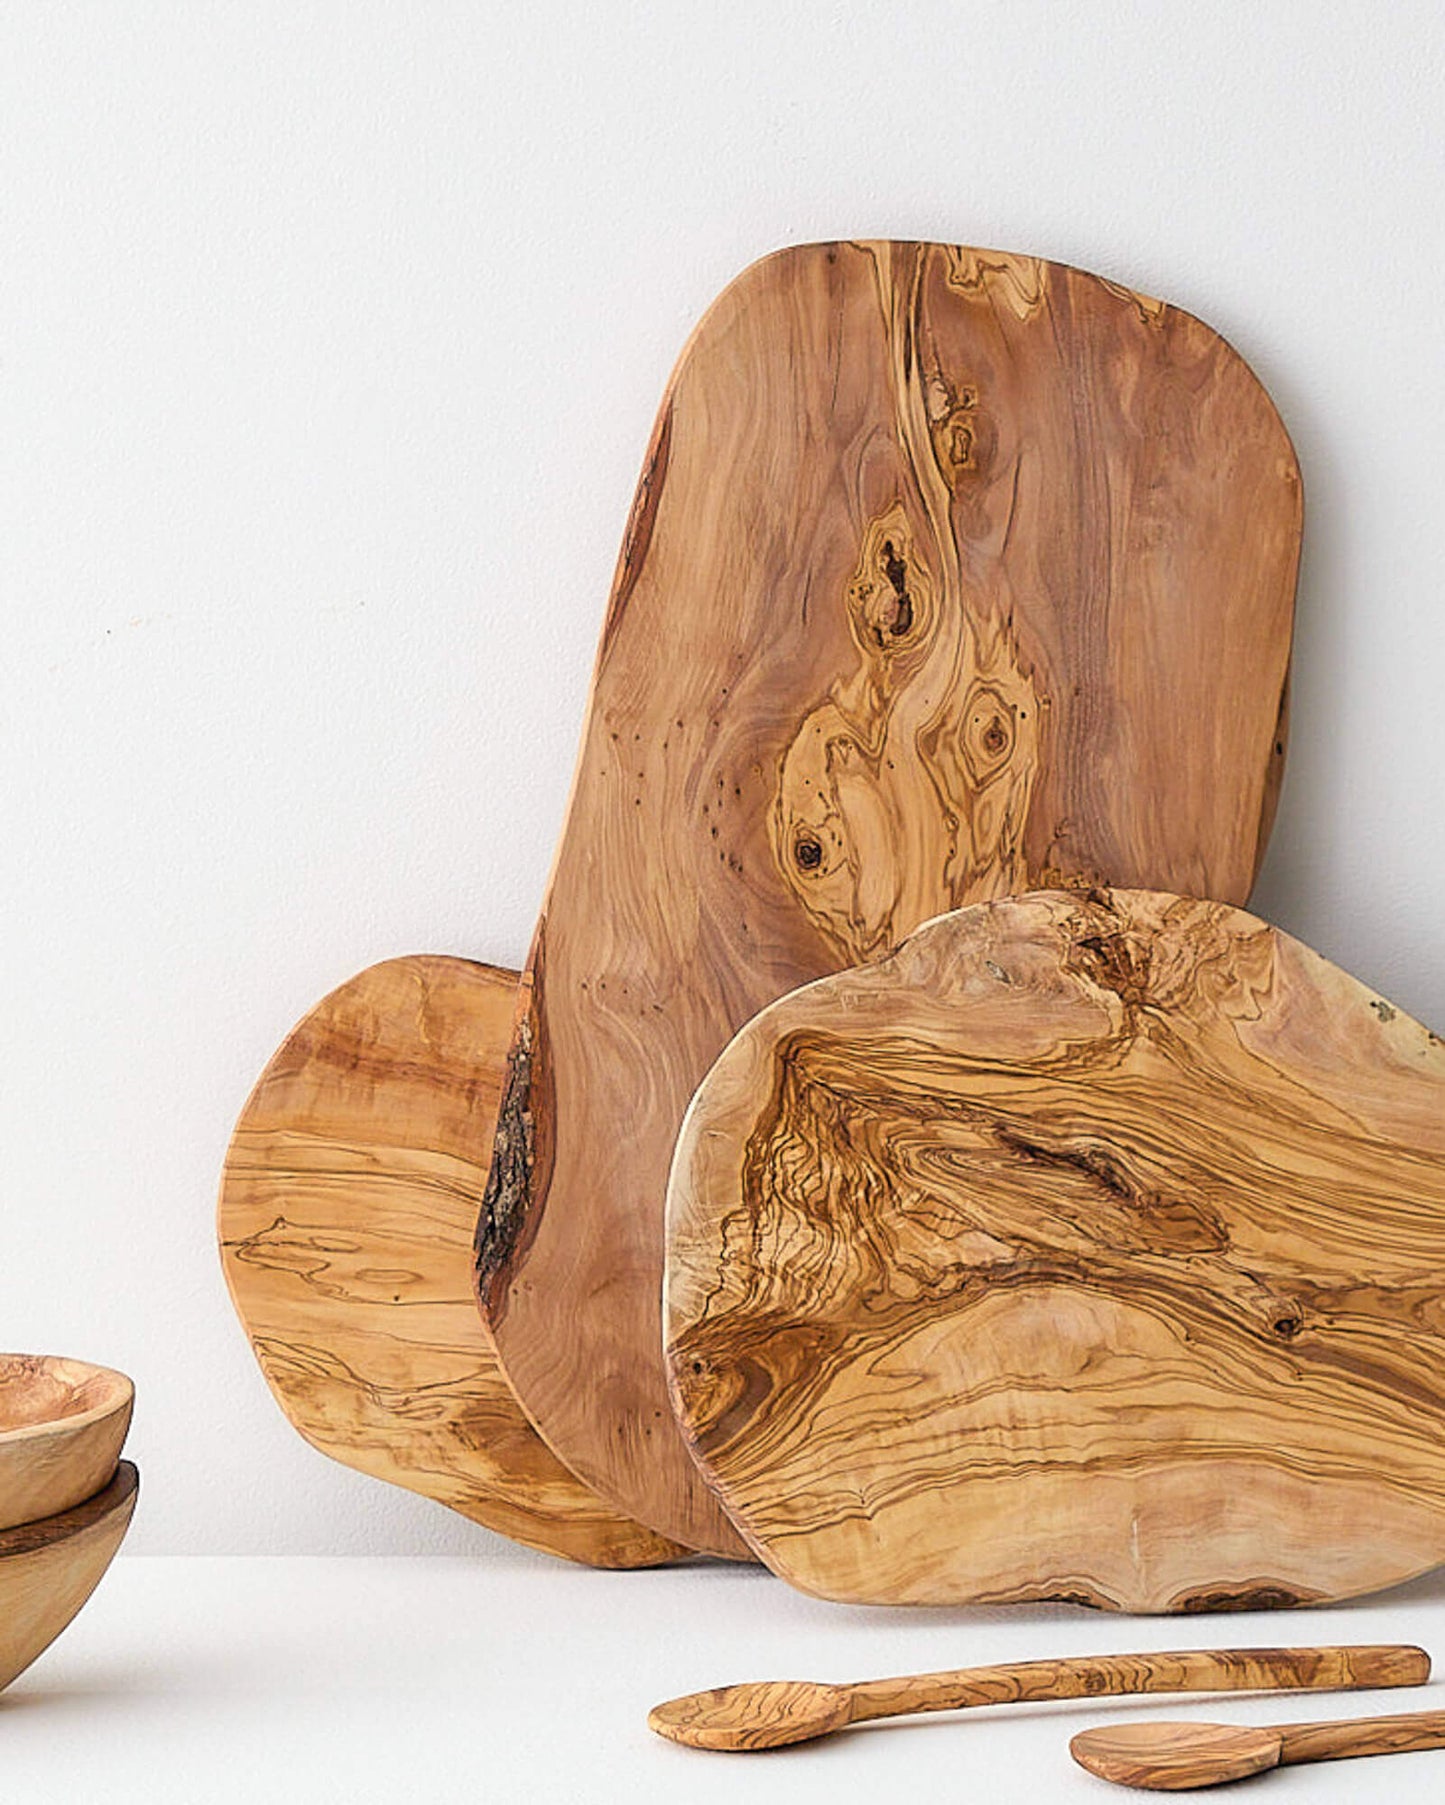 Olive Wood Collection by Fairkind. Handcrafted by master artisans in Tunisia.